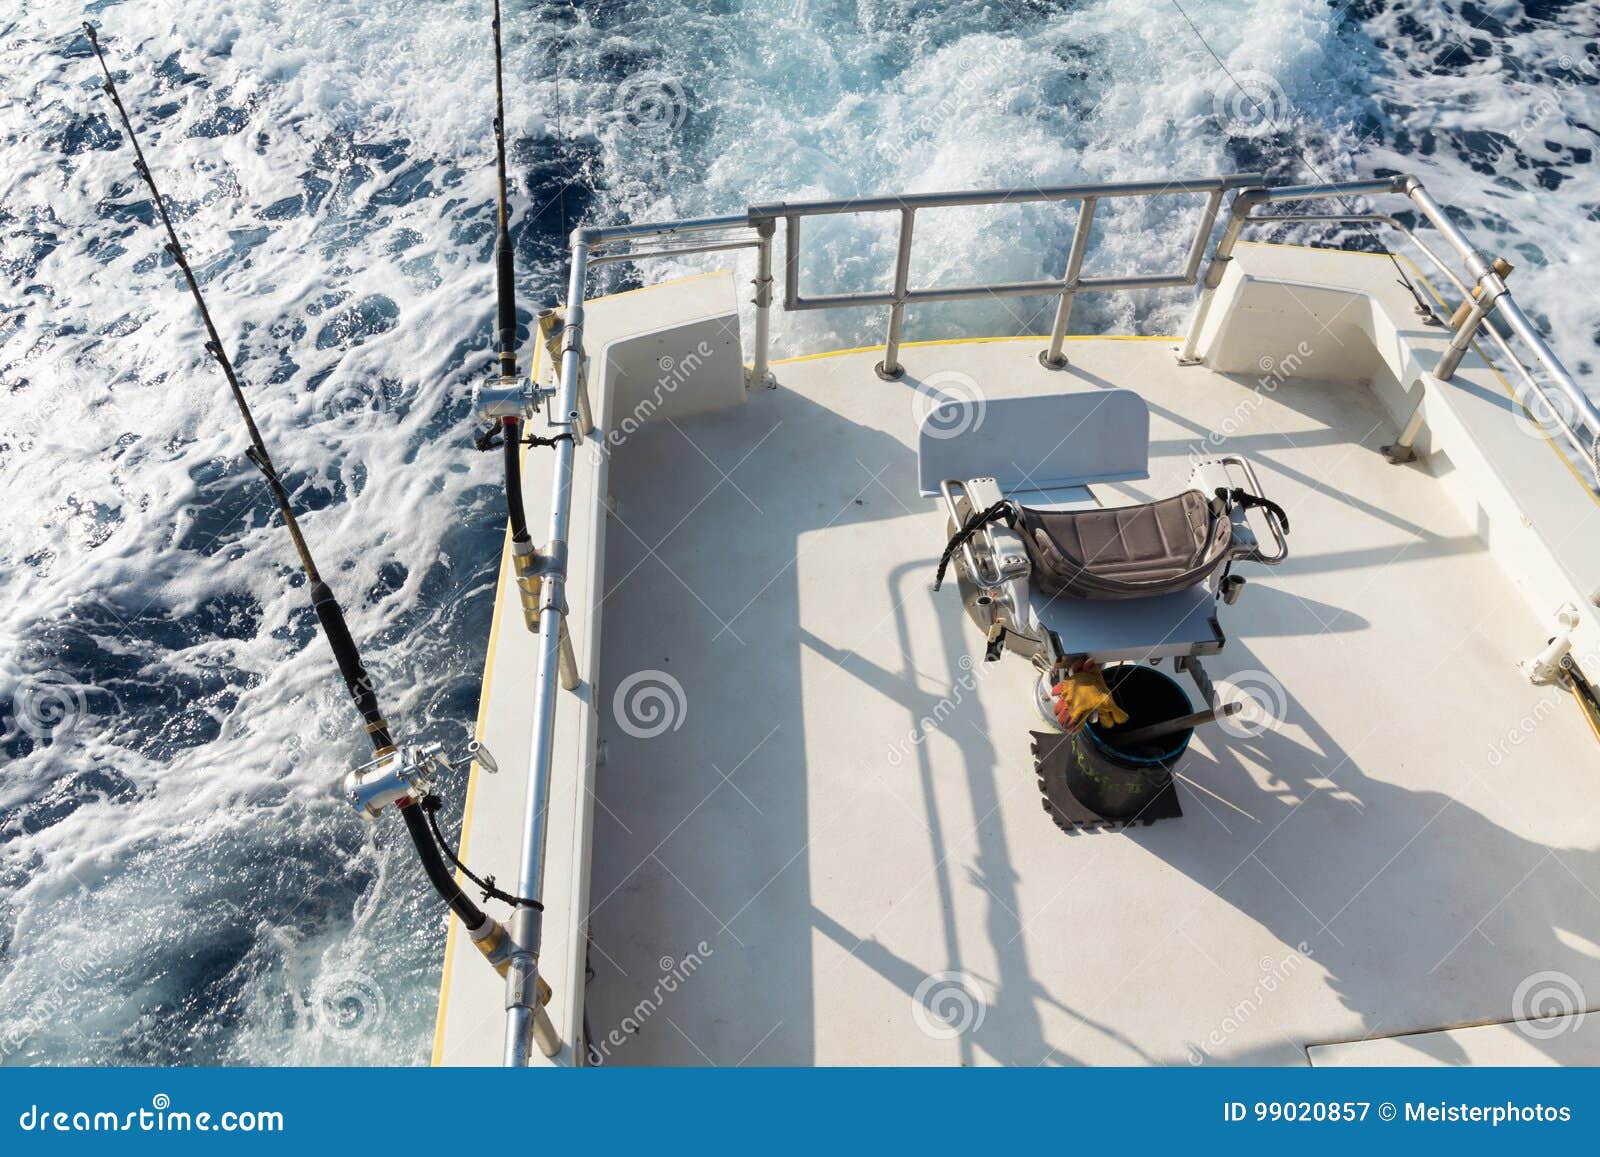 Rods and Reels Set Up on Rail of Boat Stock Image - Image of deep, boat:  99020857